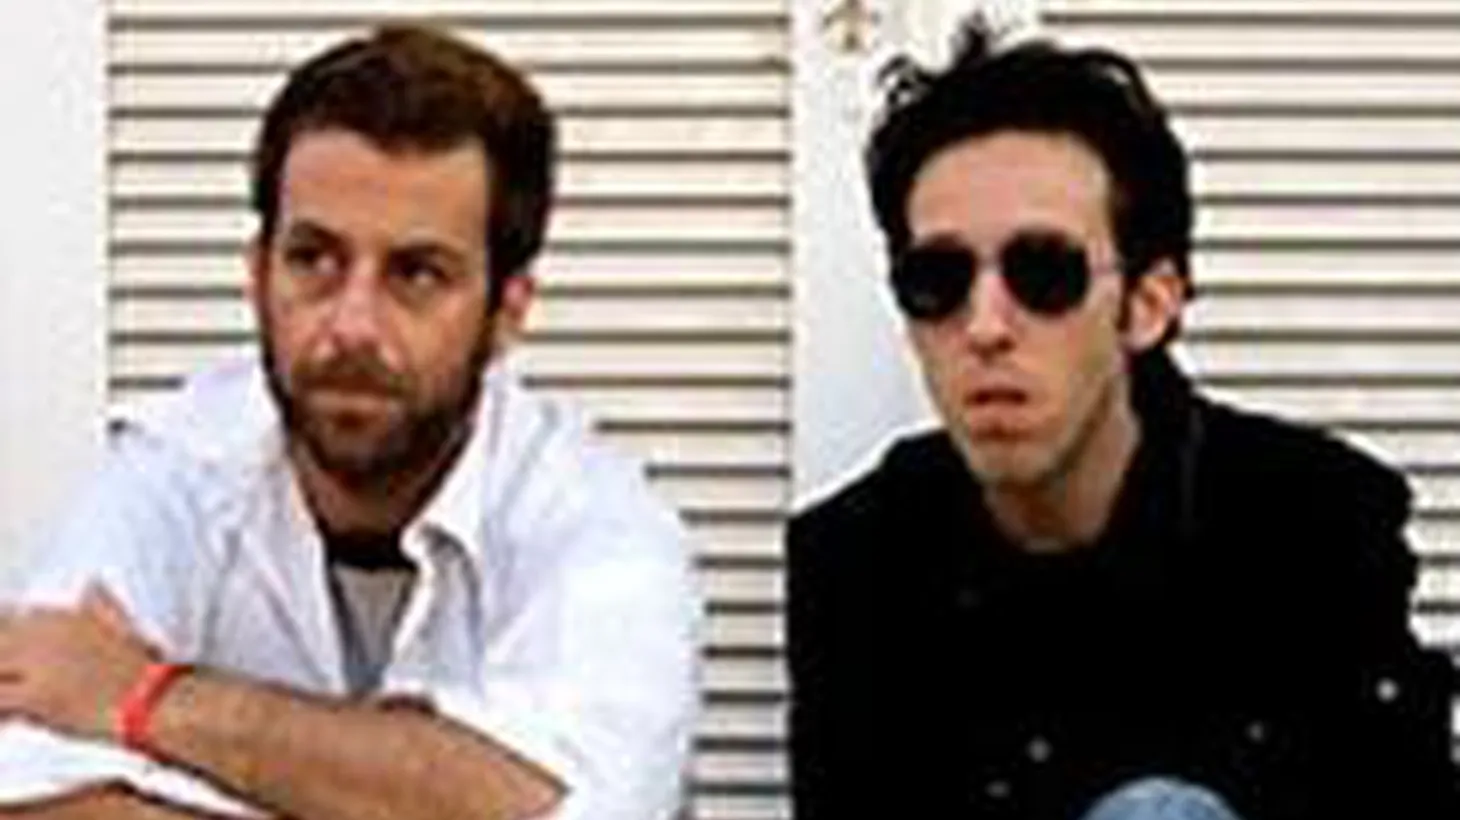 Tel Aviv’s rock quartet, aptly named,  Rockfour  perform for Morning Becomes Eclectic at 11:15am.